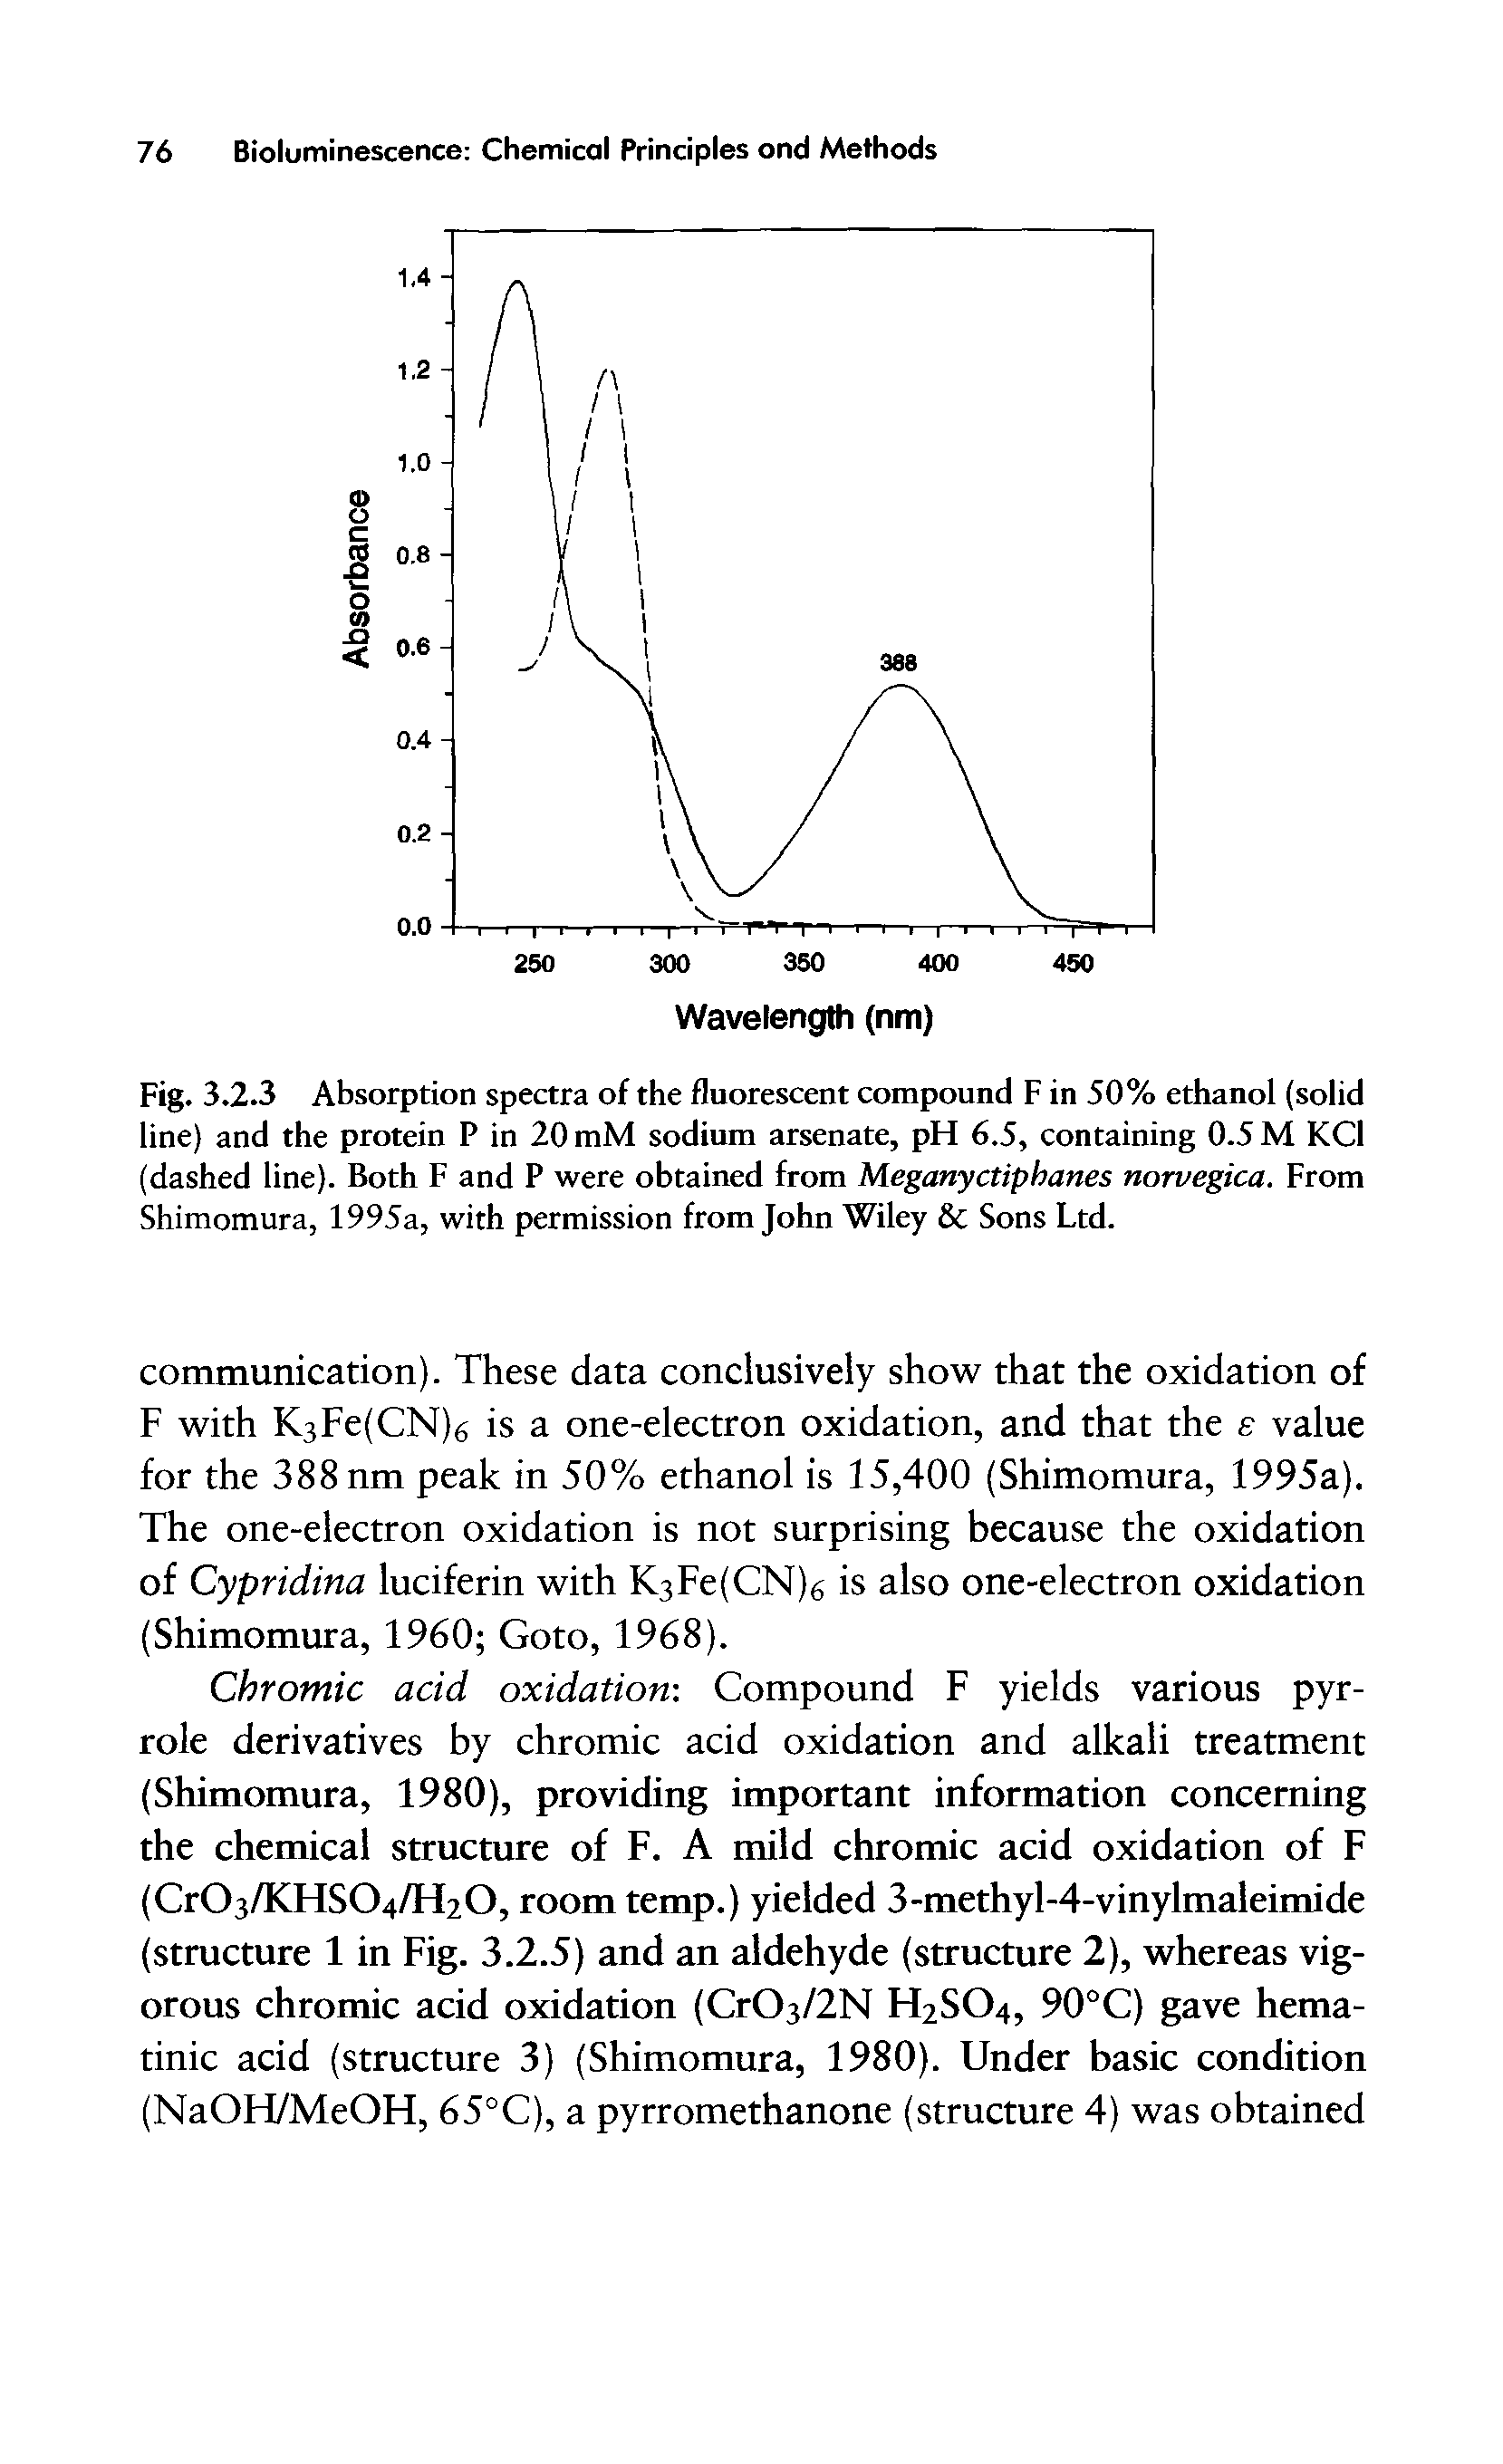 Fig. 3.2.3 Absorption spectra of the fluorescent compound F in 50% ethanol (solid line) and the protein P in 20 mM sodium arsenate, pH 6.5, containing 0.5 M KC1 (dashed line). Both F and P were obtained from Meganyctiphanes norvegica. From Shimomura, 1995a, with permission from John Wiley Sons Ltd.